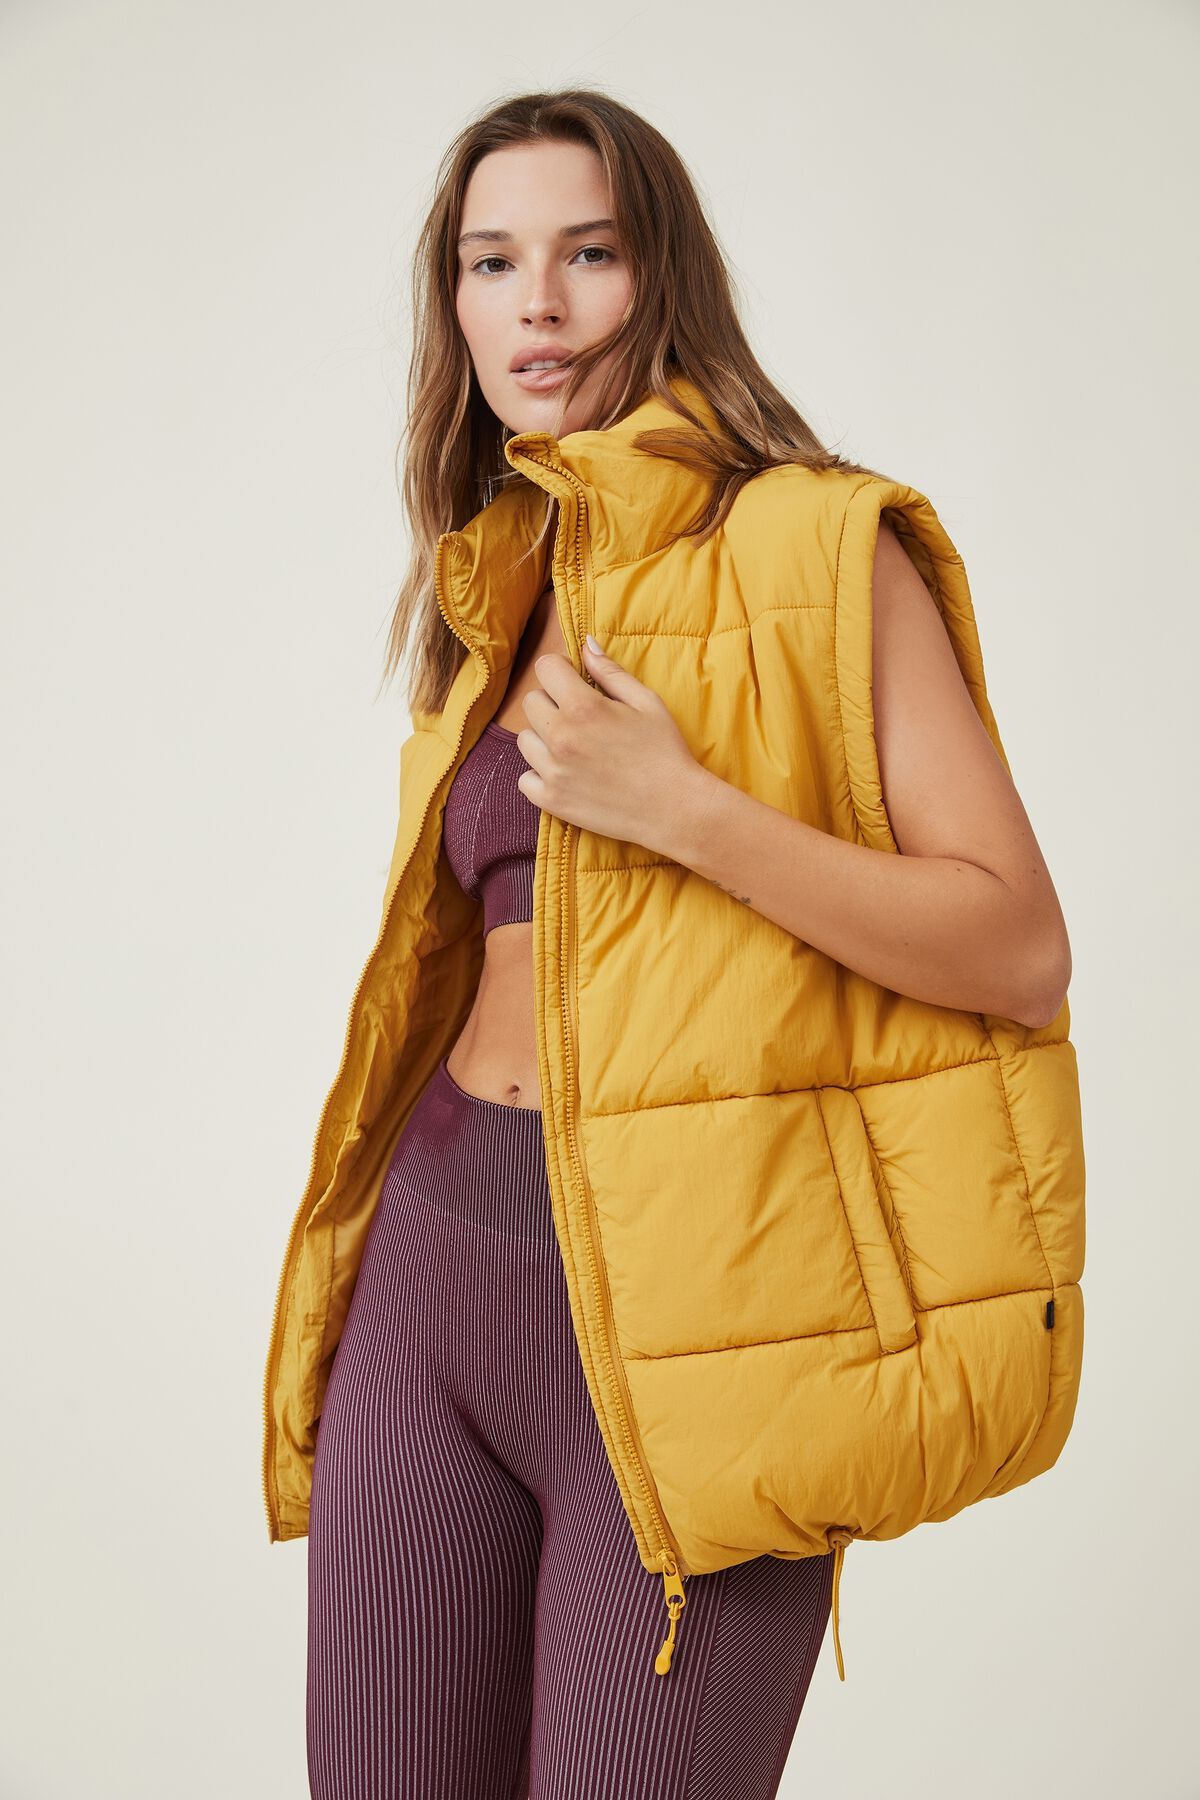 The Recycled Mother Puffer Vest | Cotton On (ANZ)